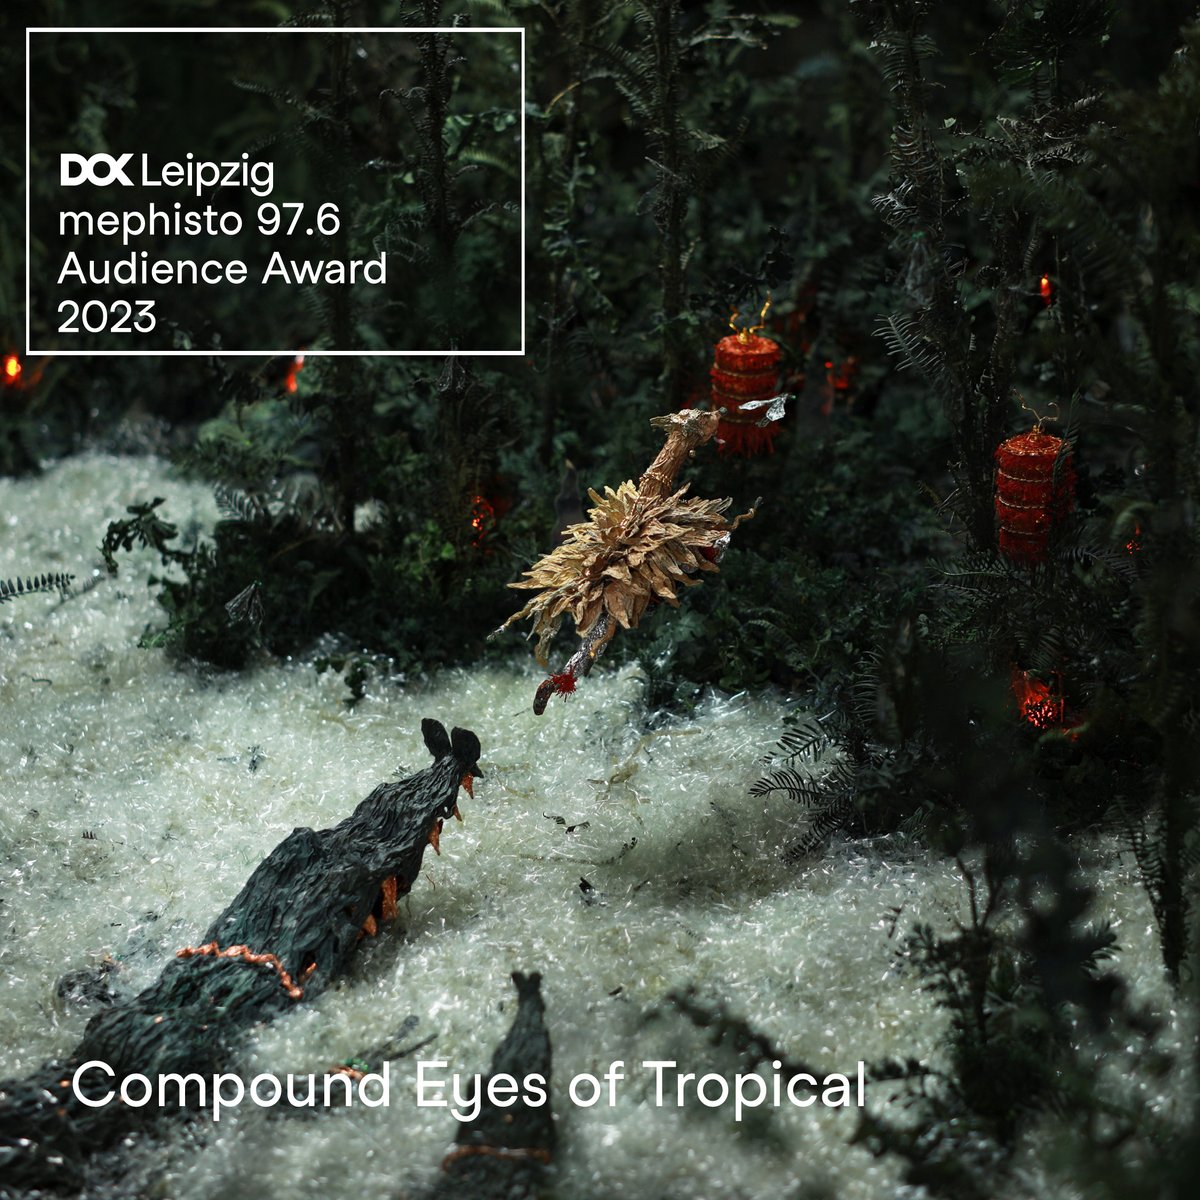 The @mephisto976 Award went to the short animated film “Compound Eyes of Tropical” by Zhang Xu Zhan. A beauty!